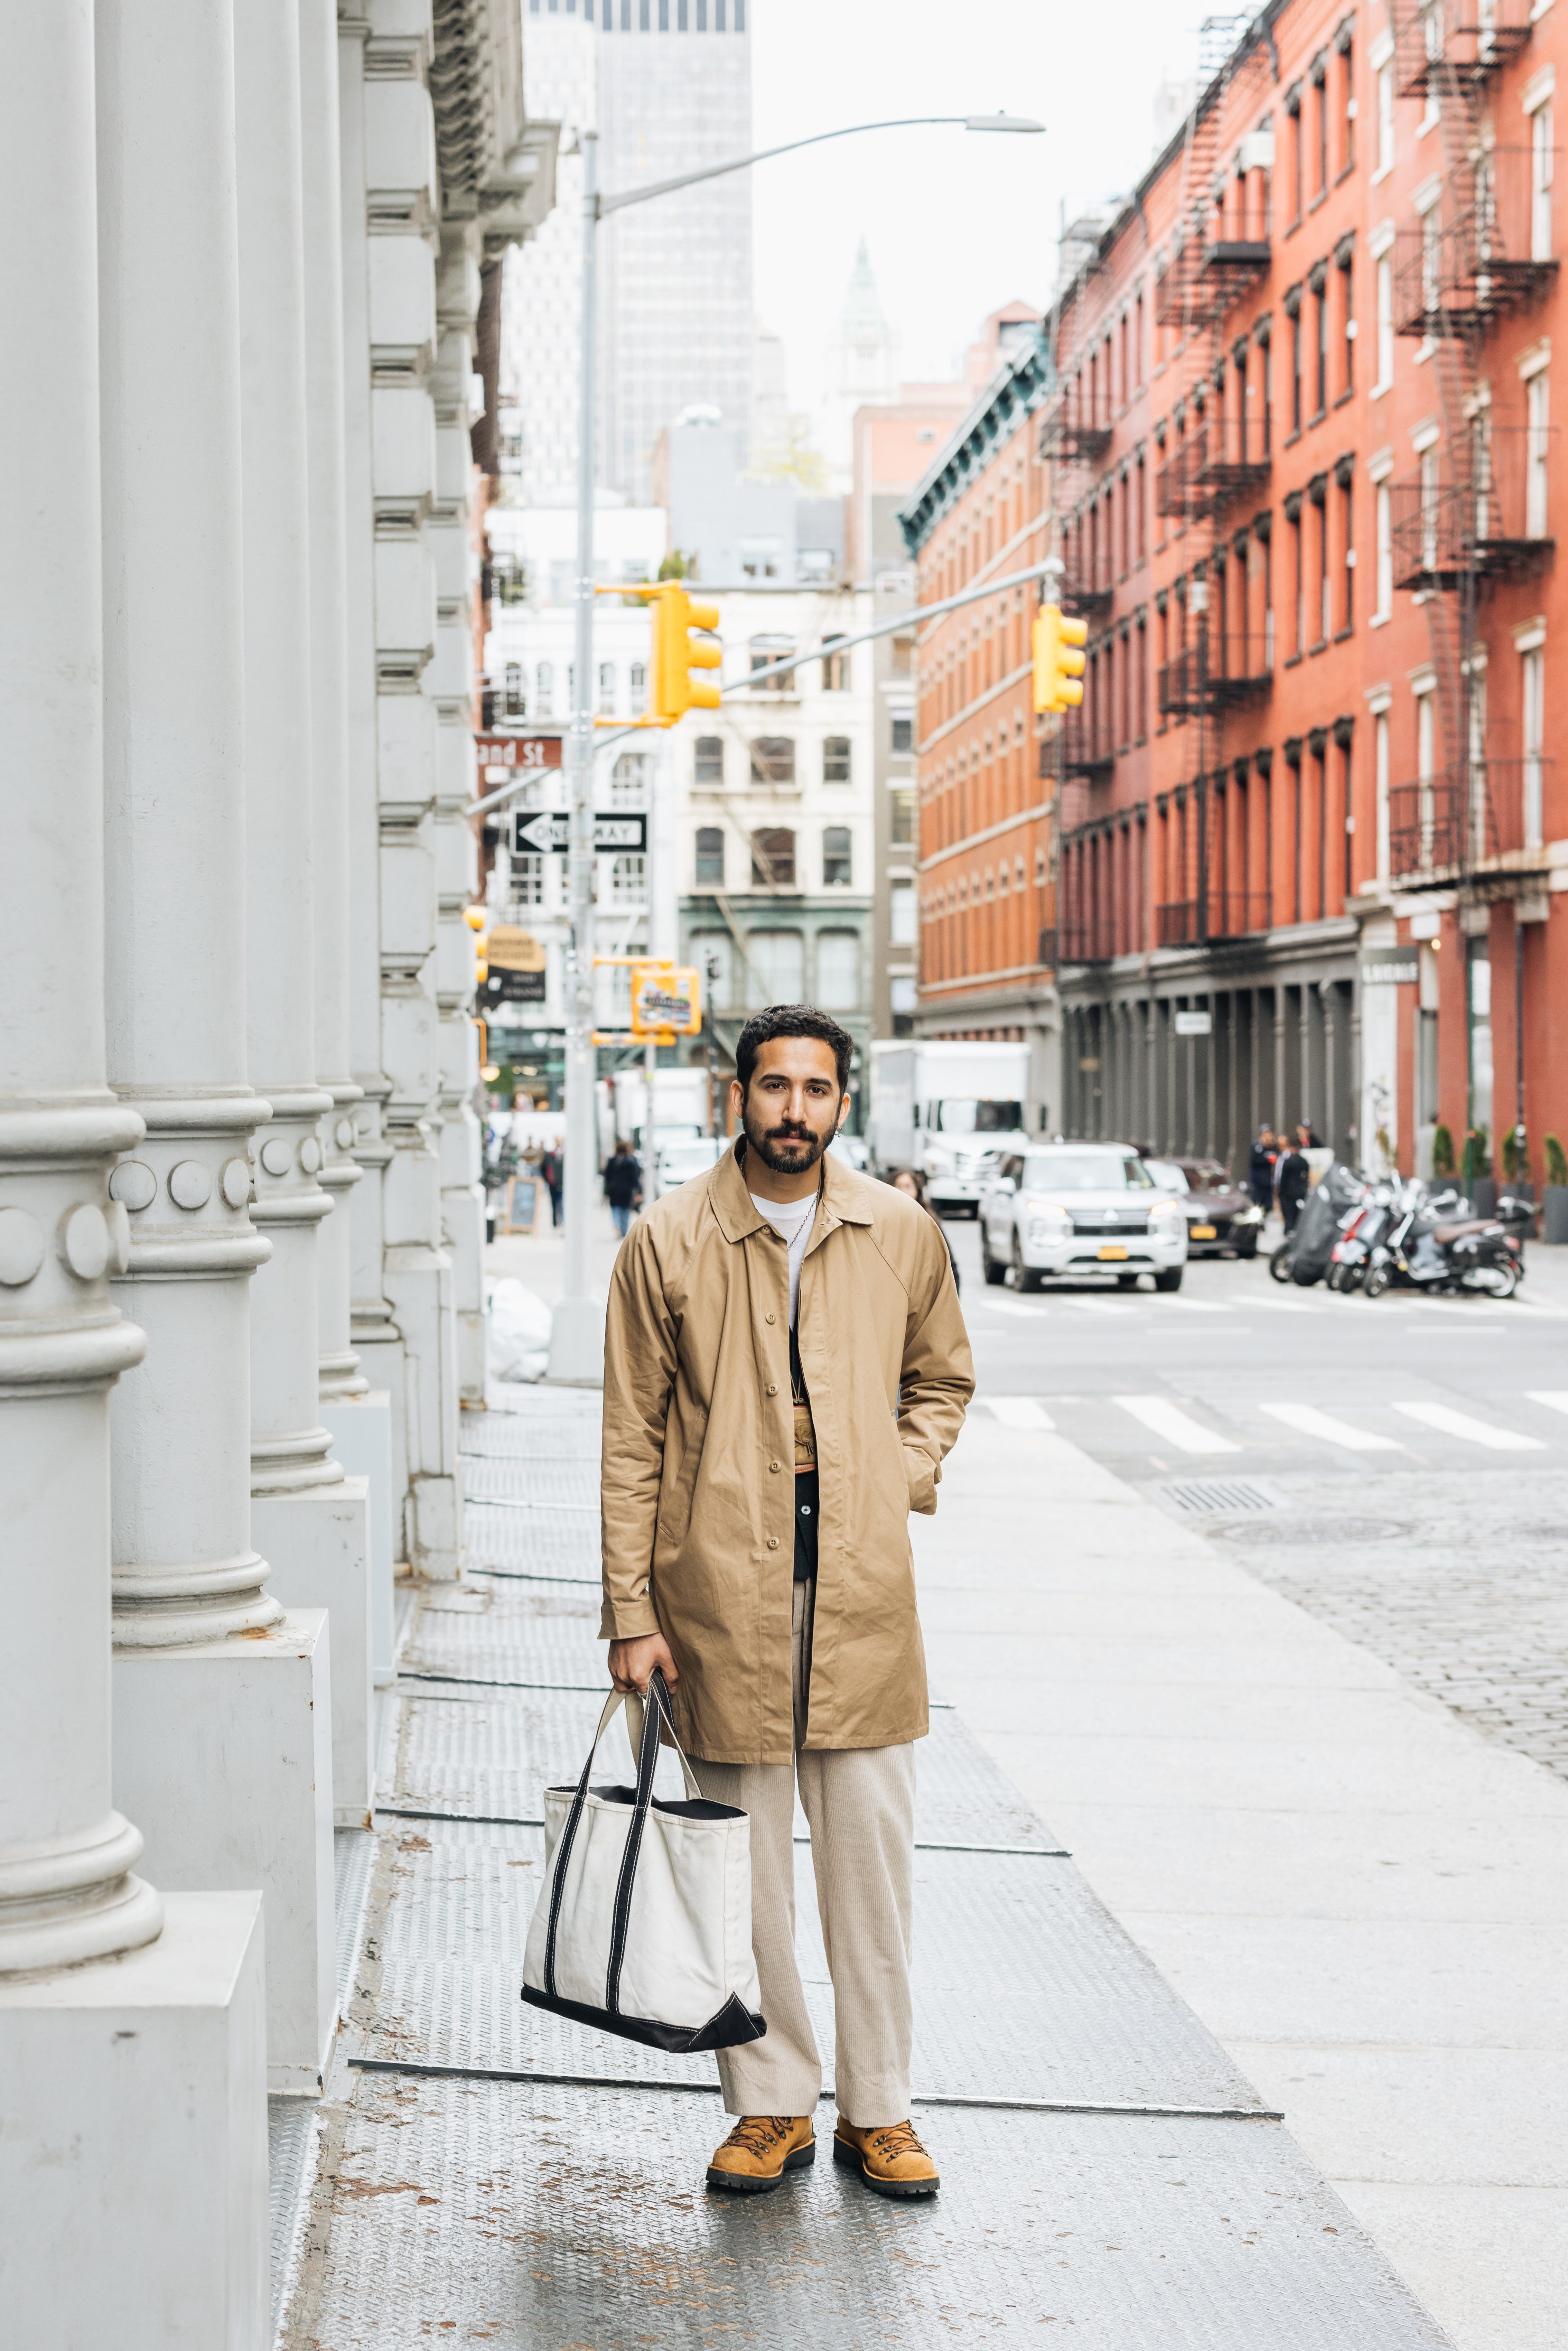 Pin on Streetstyle/Personal Style